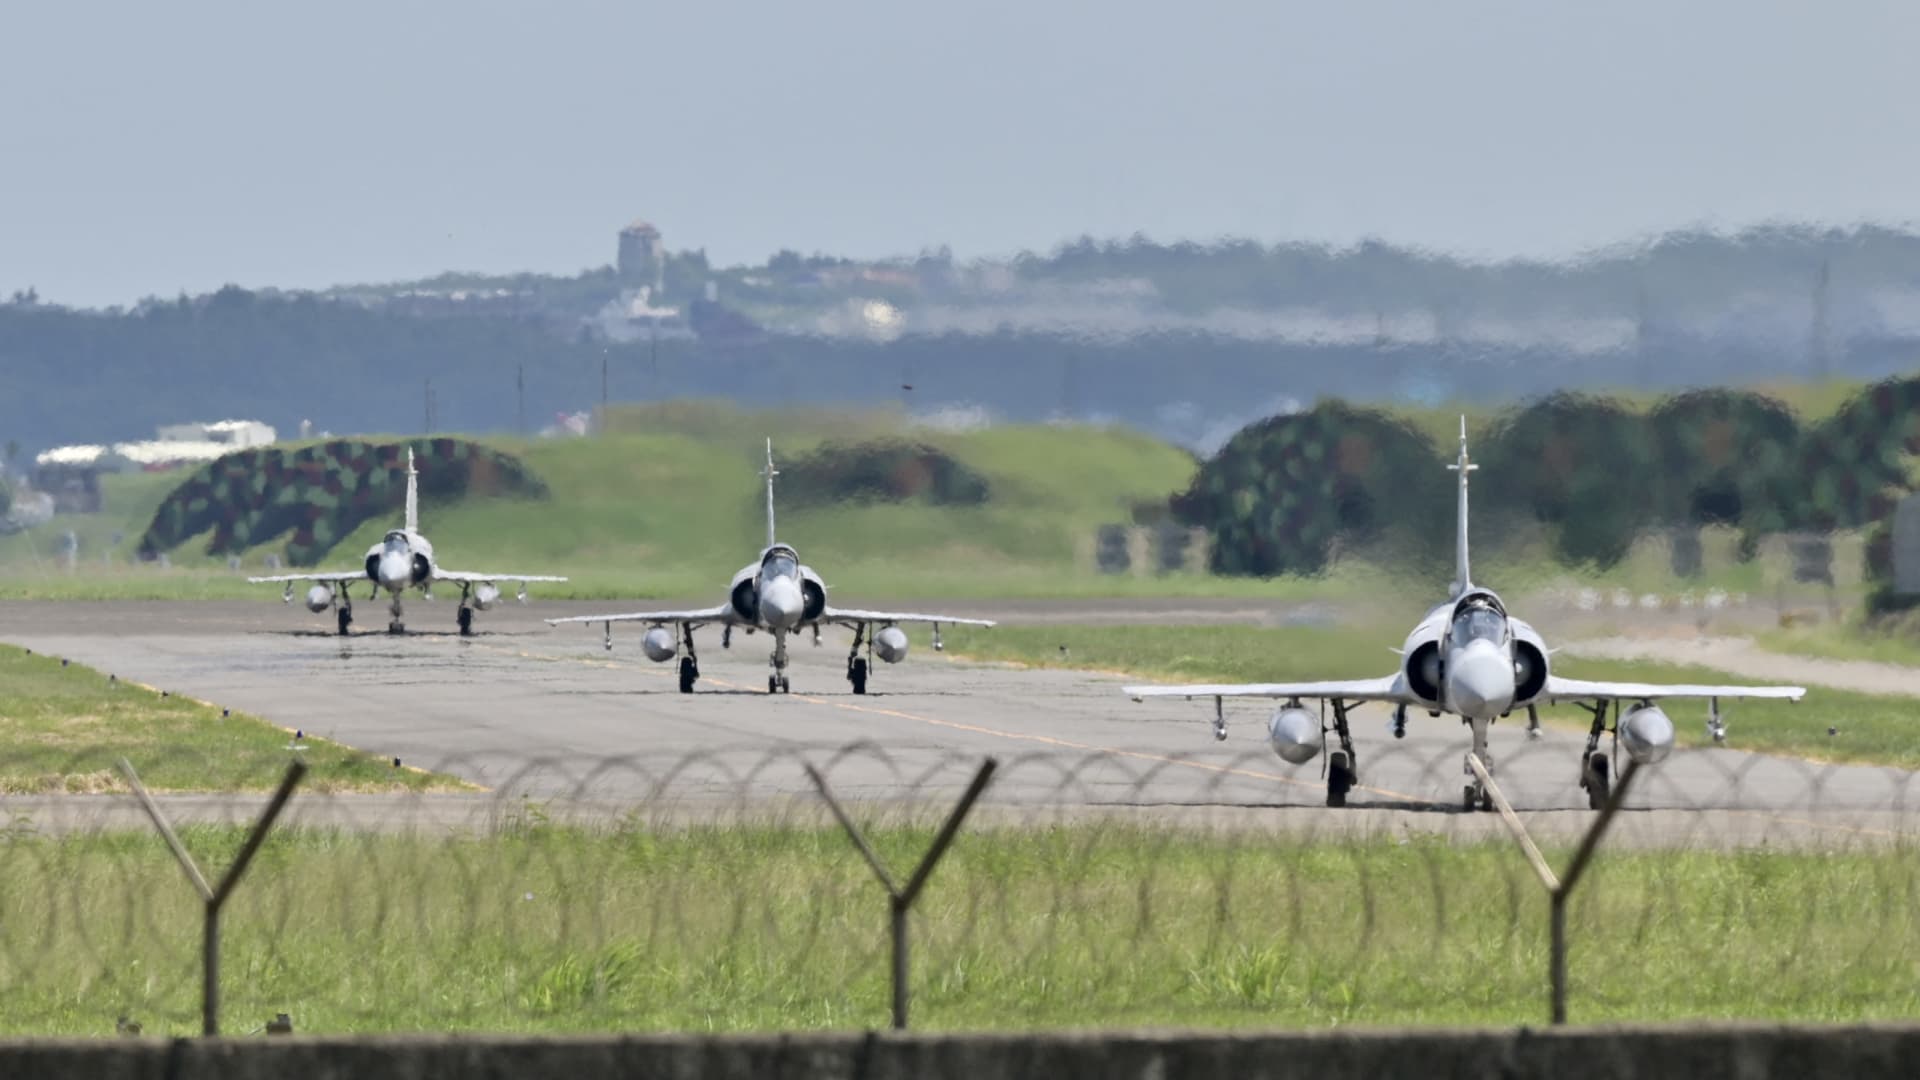 During the last Taiwan crisis, China's military was outmatched by U.S. forces. Not now.